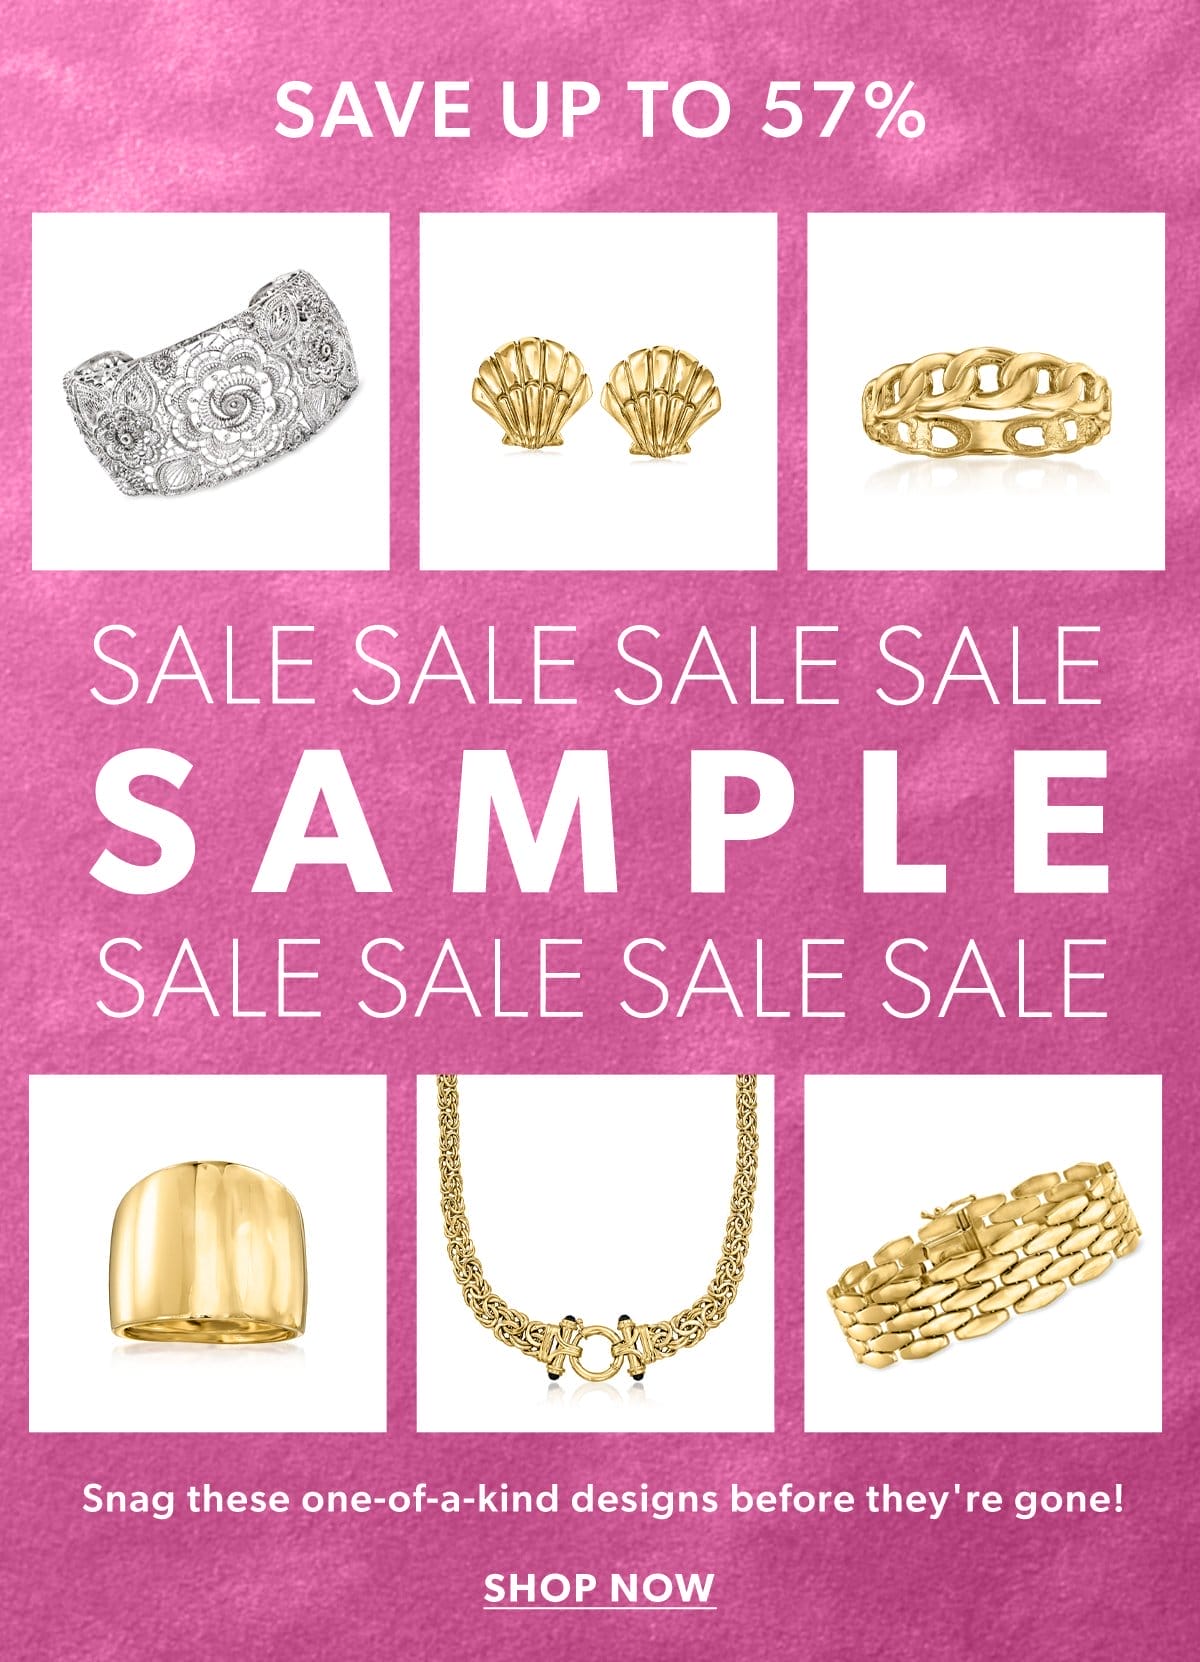 Sample Sale. Save Up To 57%